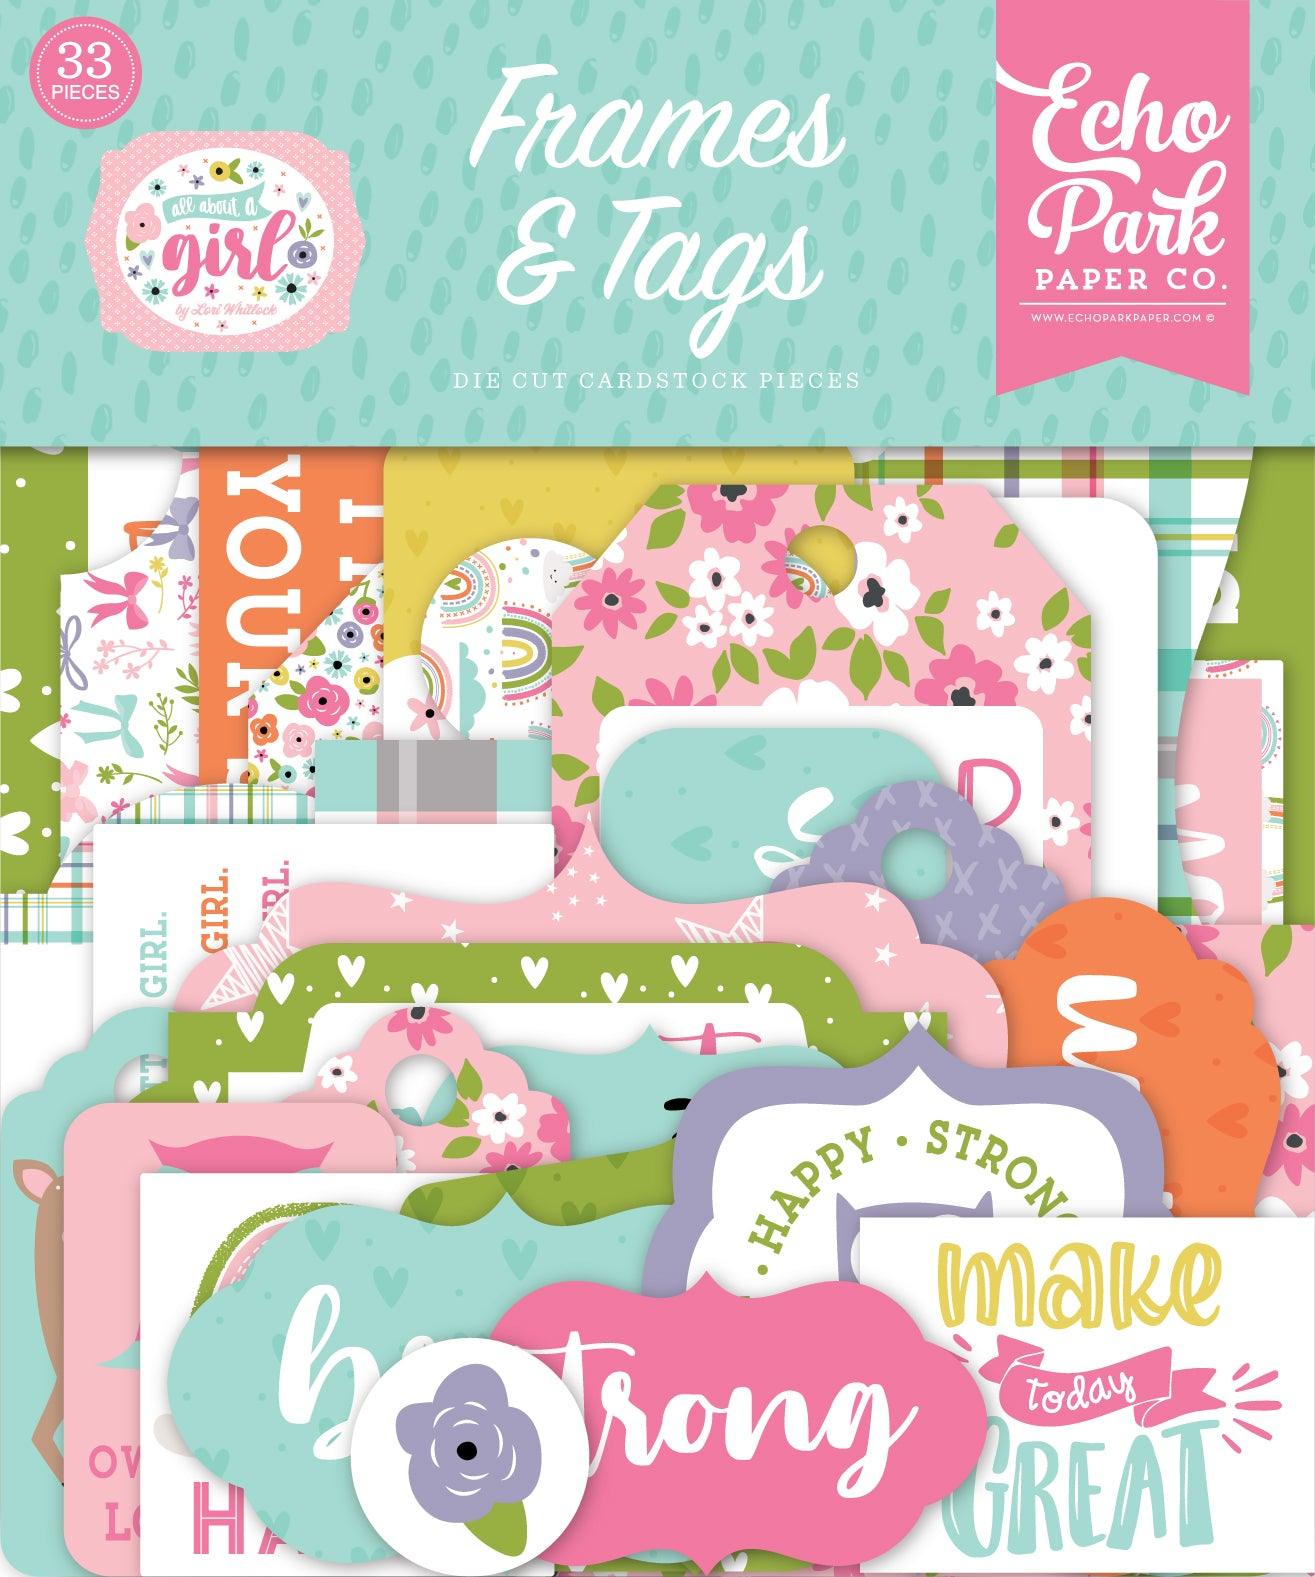 All About A Girl Collection 5 x 5 Scrapbook Tags & Frames Die Cuts by Echo Park Paper - Scrapbook Supply Companies